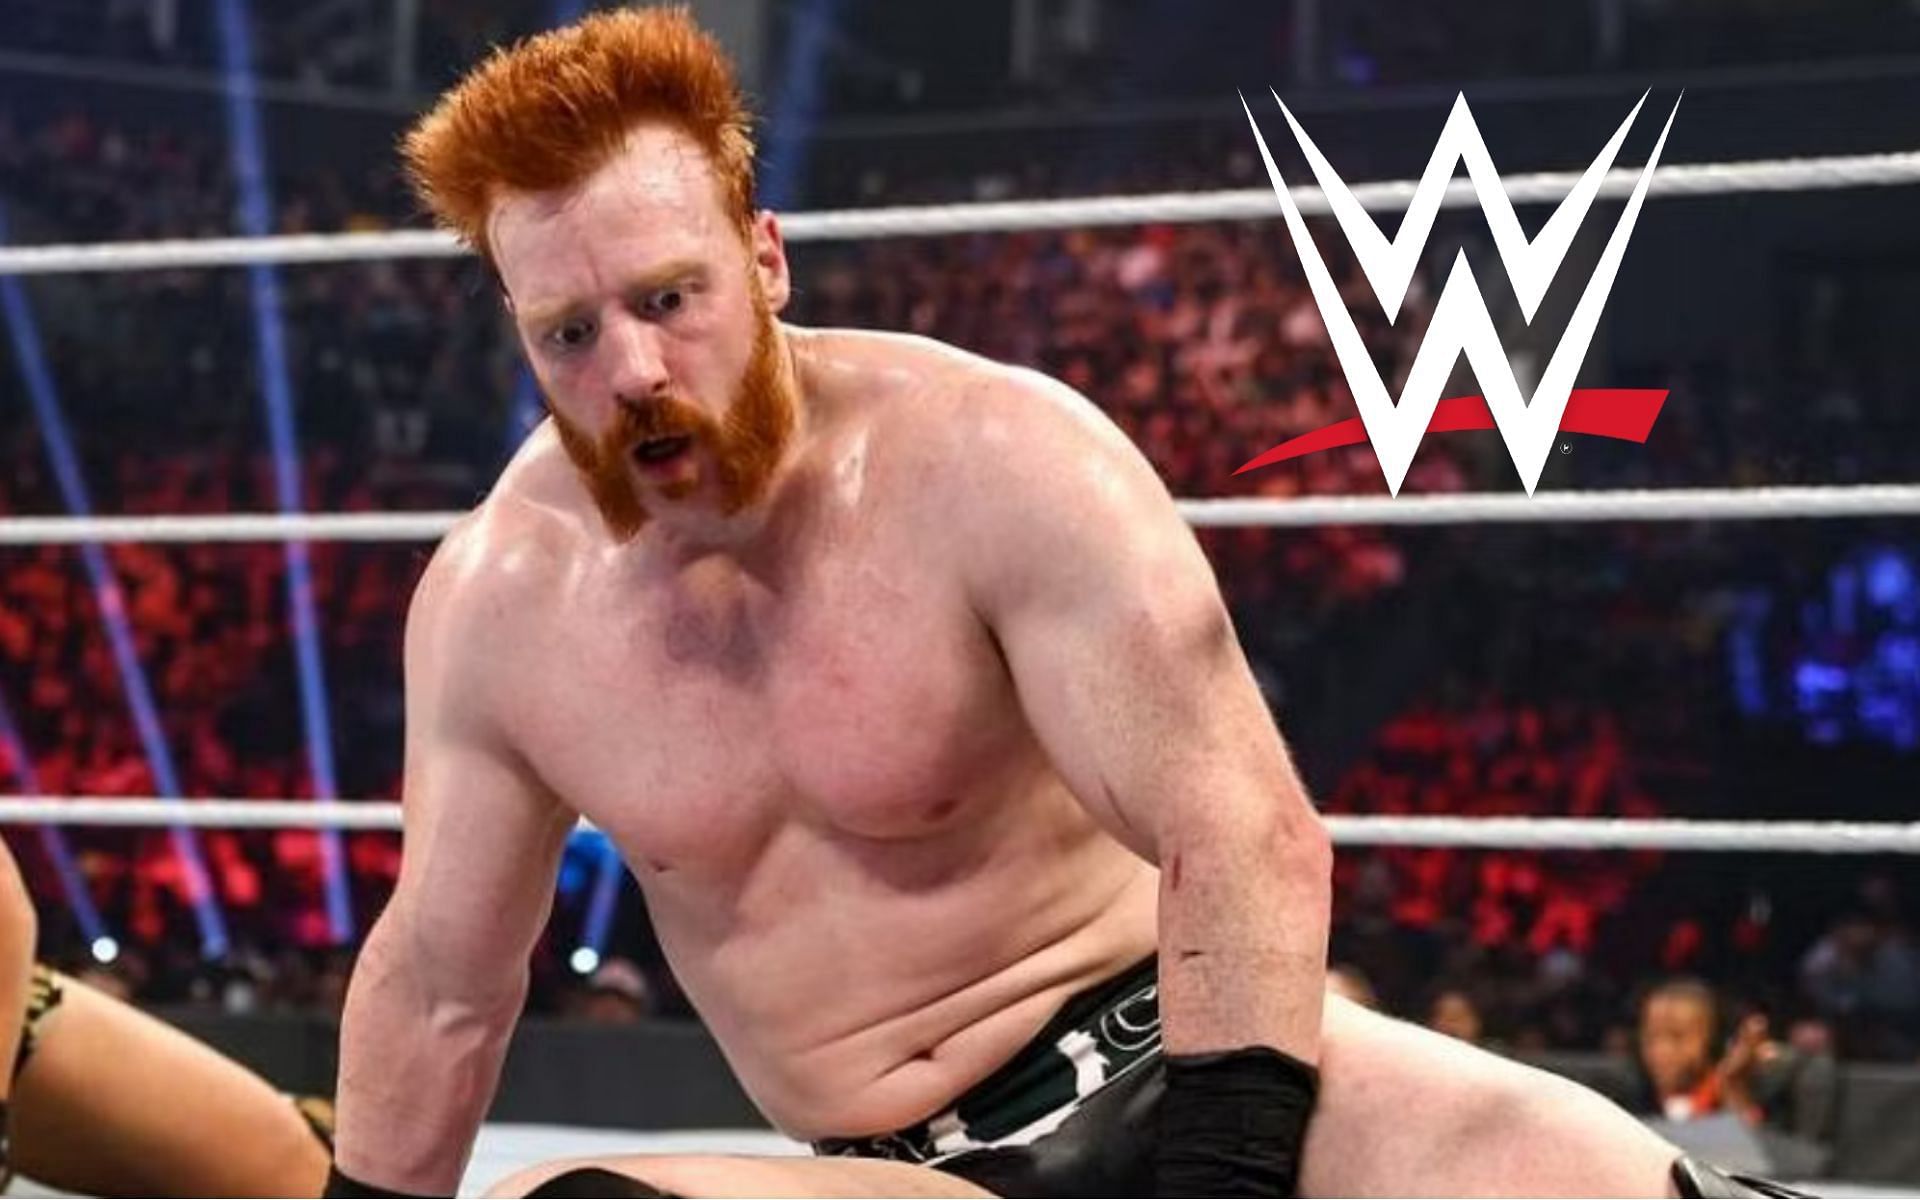 Sheamus is a five-time WWE Tag Team Champion with Claudio Castagnoli (fka Cesaro)